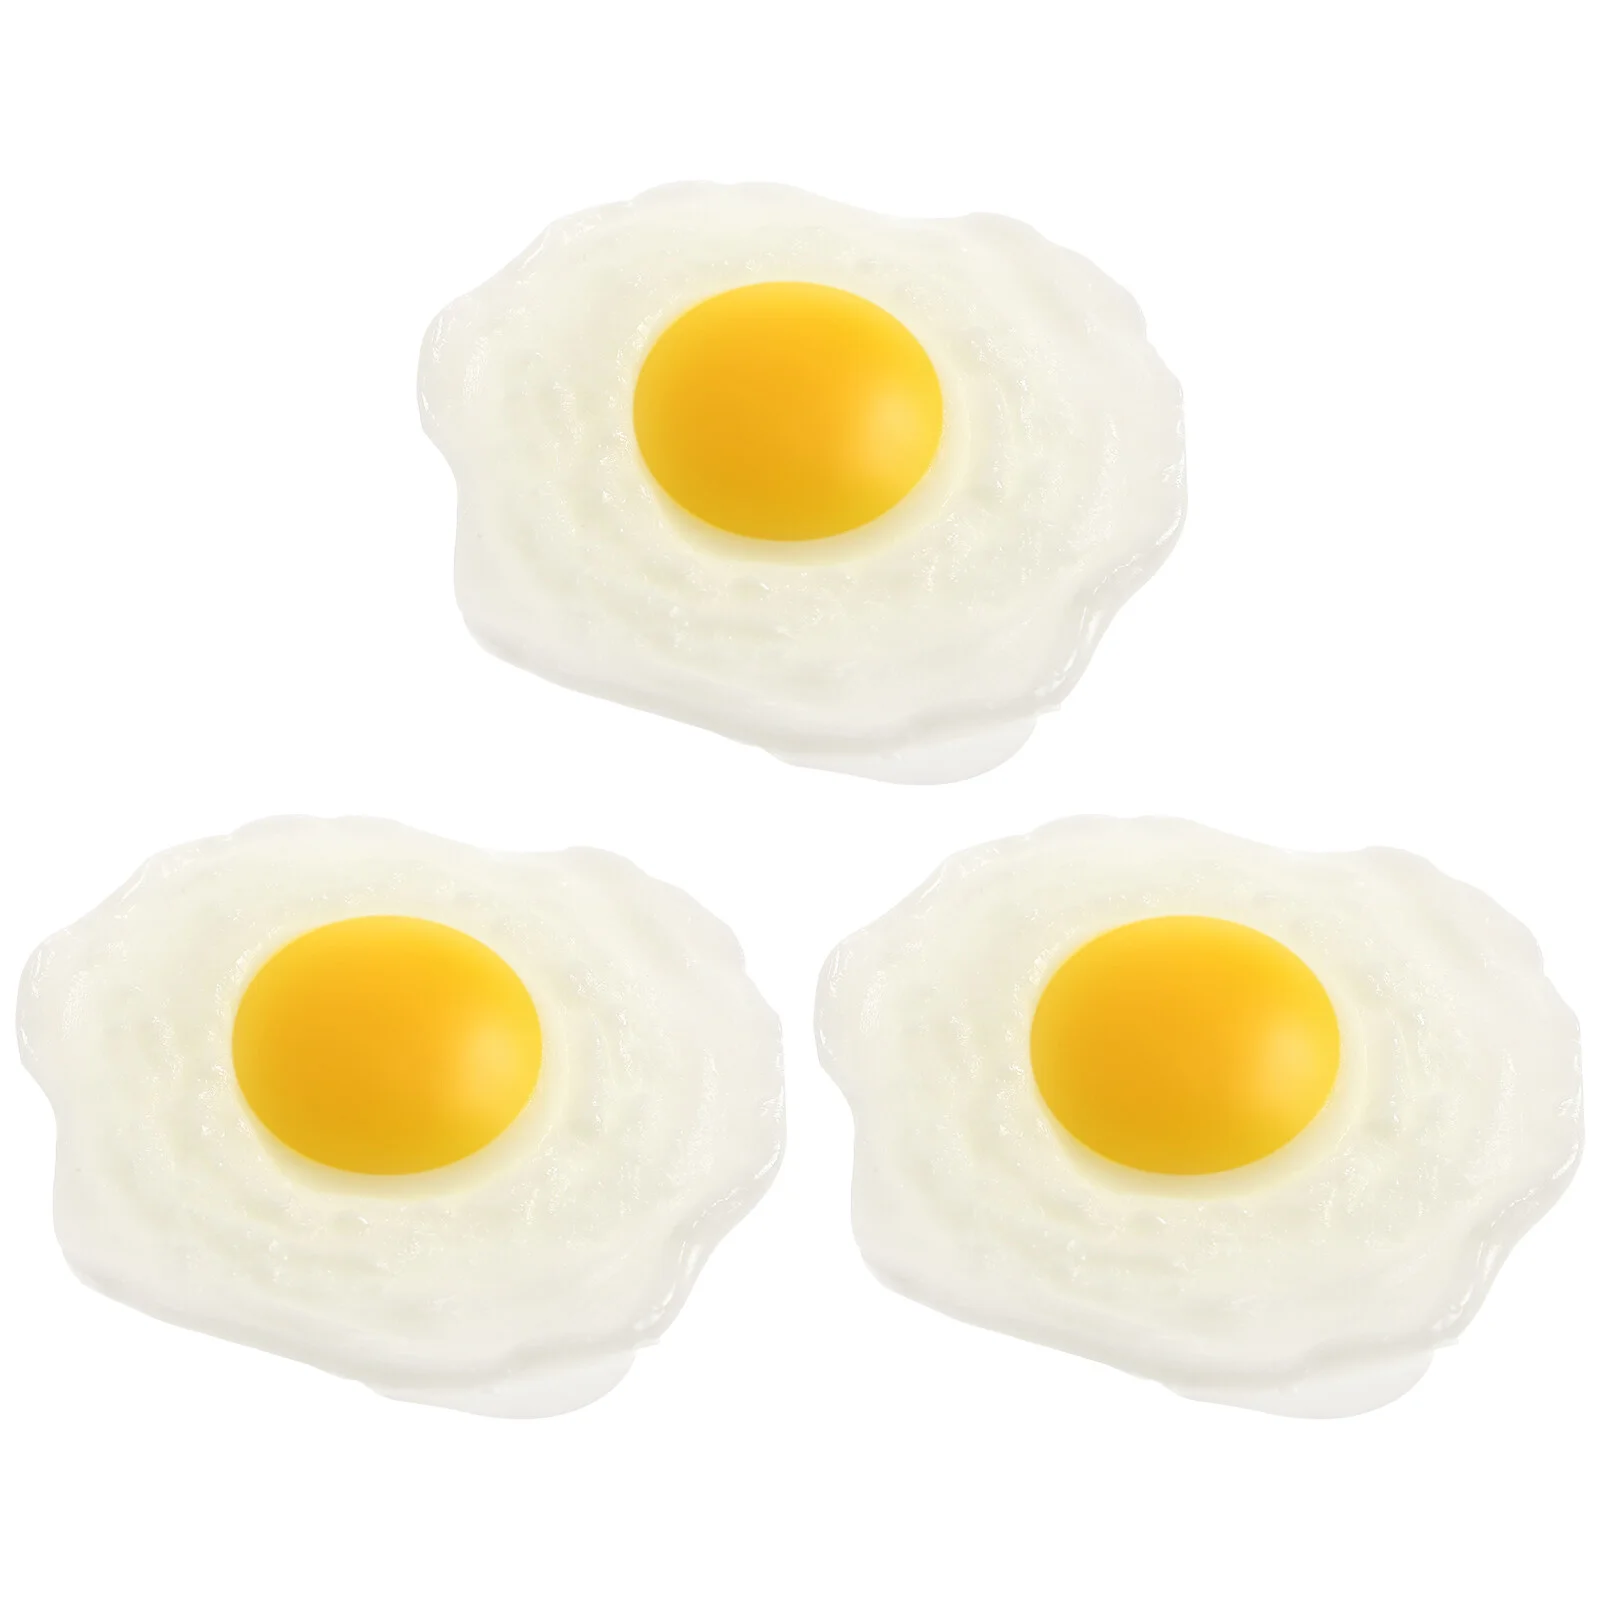 

3Pcs Stretchy Poached Egg Squeeze Fried Egg Simulation Food Toy Pressure Relief Plaything Party Favors